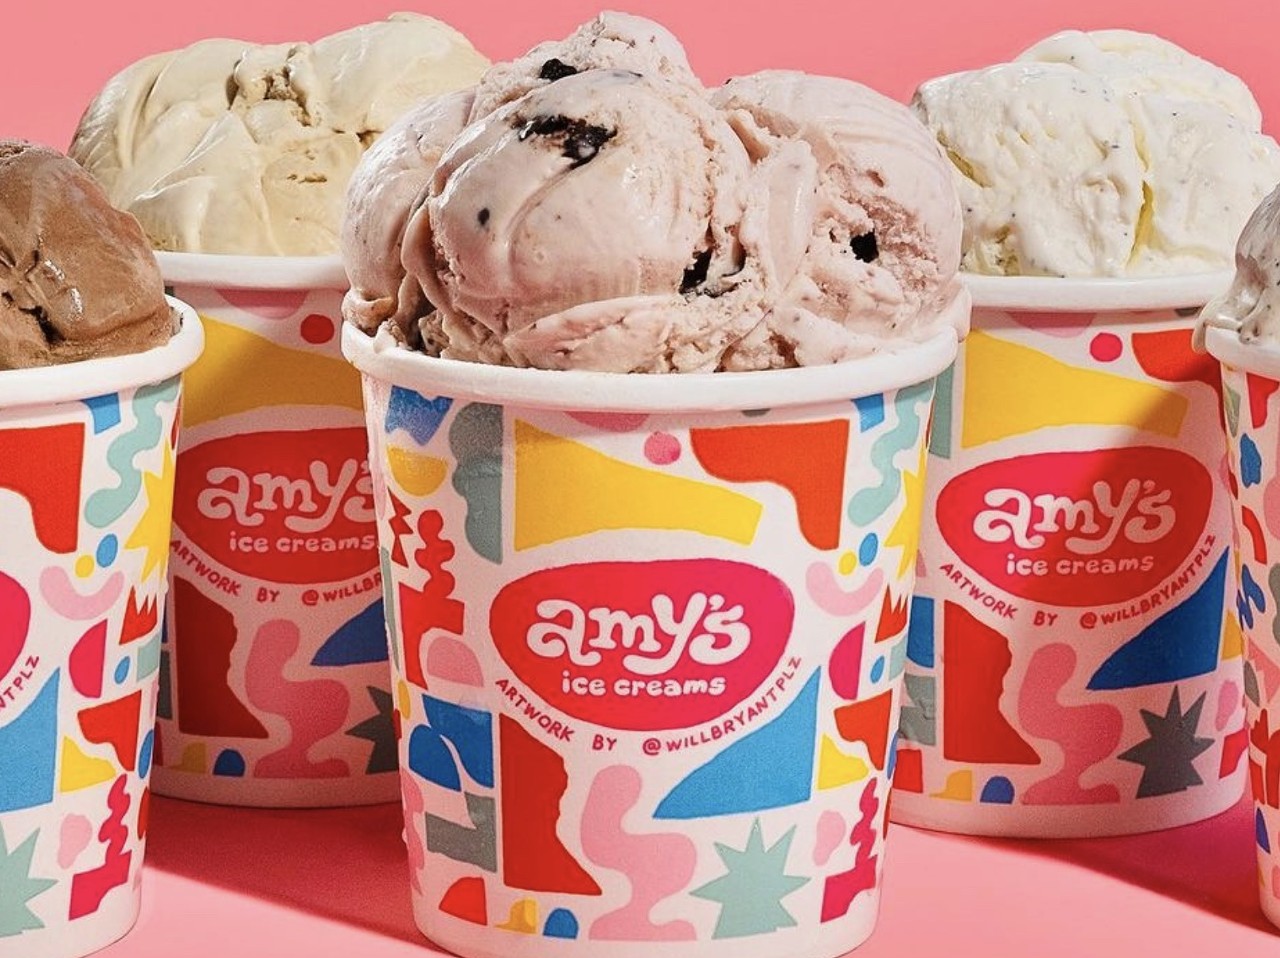 Amy’s Ice Creams
255 E. Basse Rd., (210) 832-8886, amysicecreams.com
Established in Austin in the mid-80s, Amy’s offers handmade artisan ice creams perfect for a summer day – or really anytime for that matter. With more than 350 flavors in rotation, you can definitely find something you’ll love.